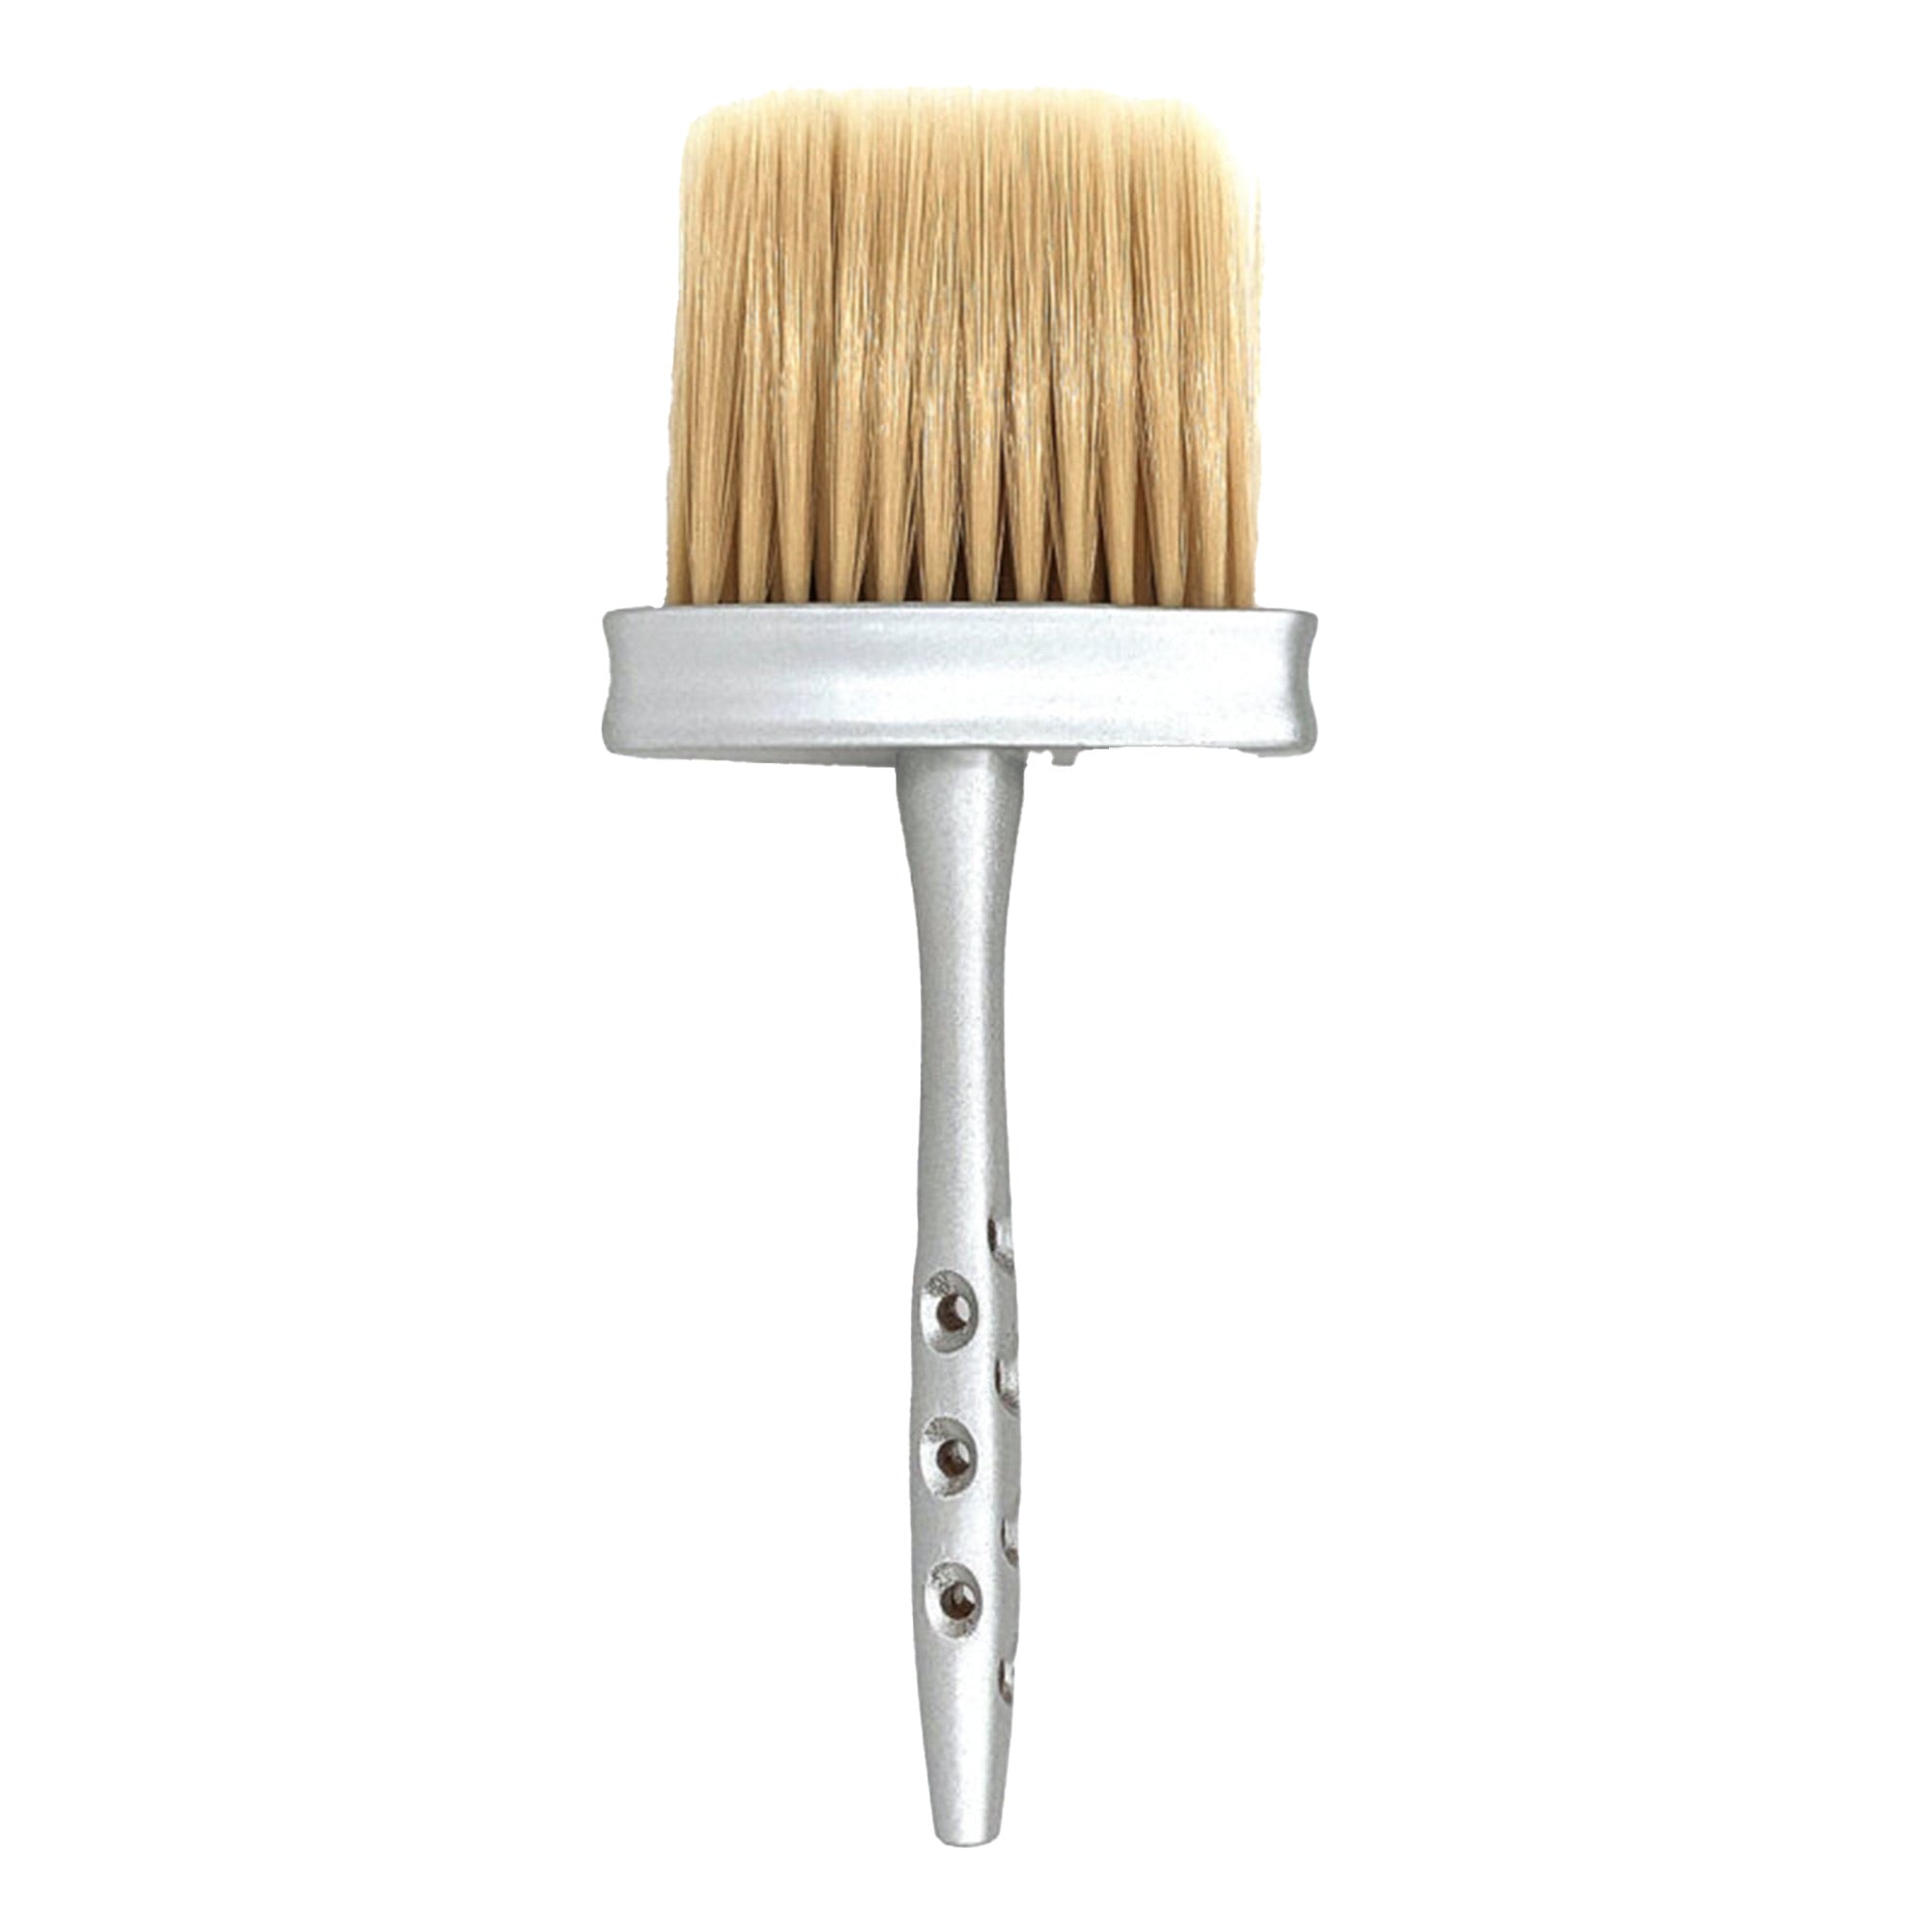 Eson - Long Handle Wooden Neck Duster Brush 25x10cm (Silver) - Eson Direct